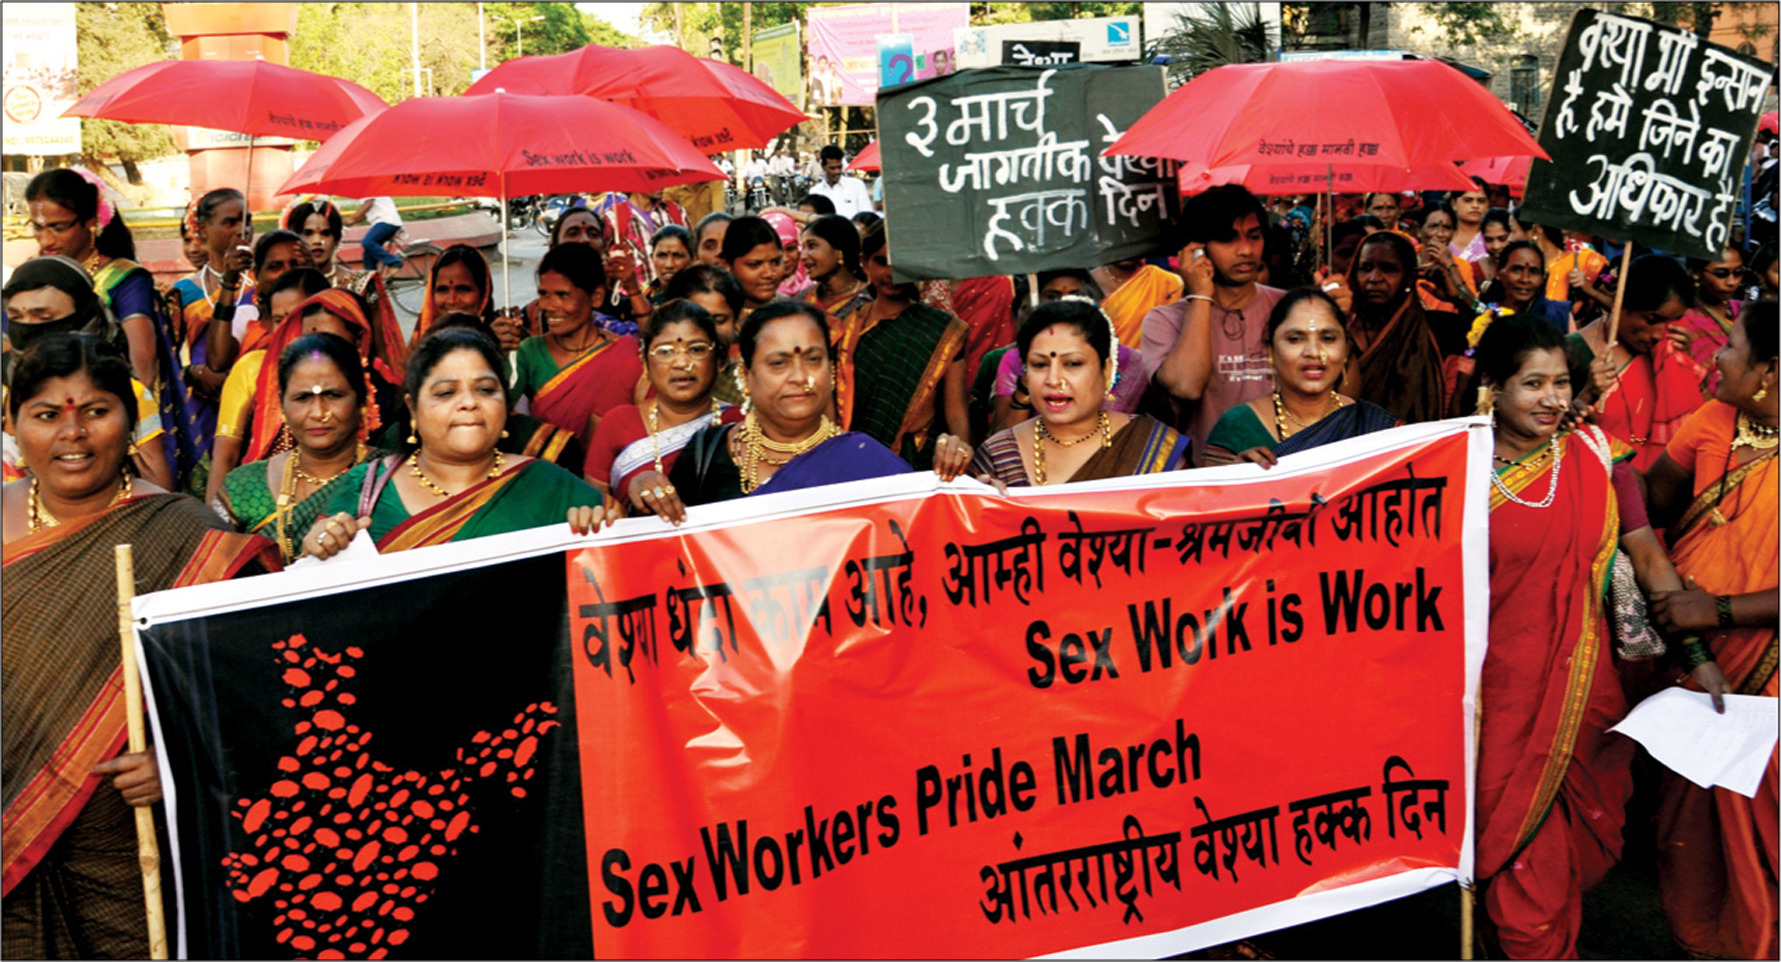 Sex Workers Not Even Treated As Human Beings : Supreme Court Asks Centre About Status Of Bill To Protect Trafficking Victims